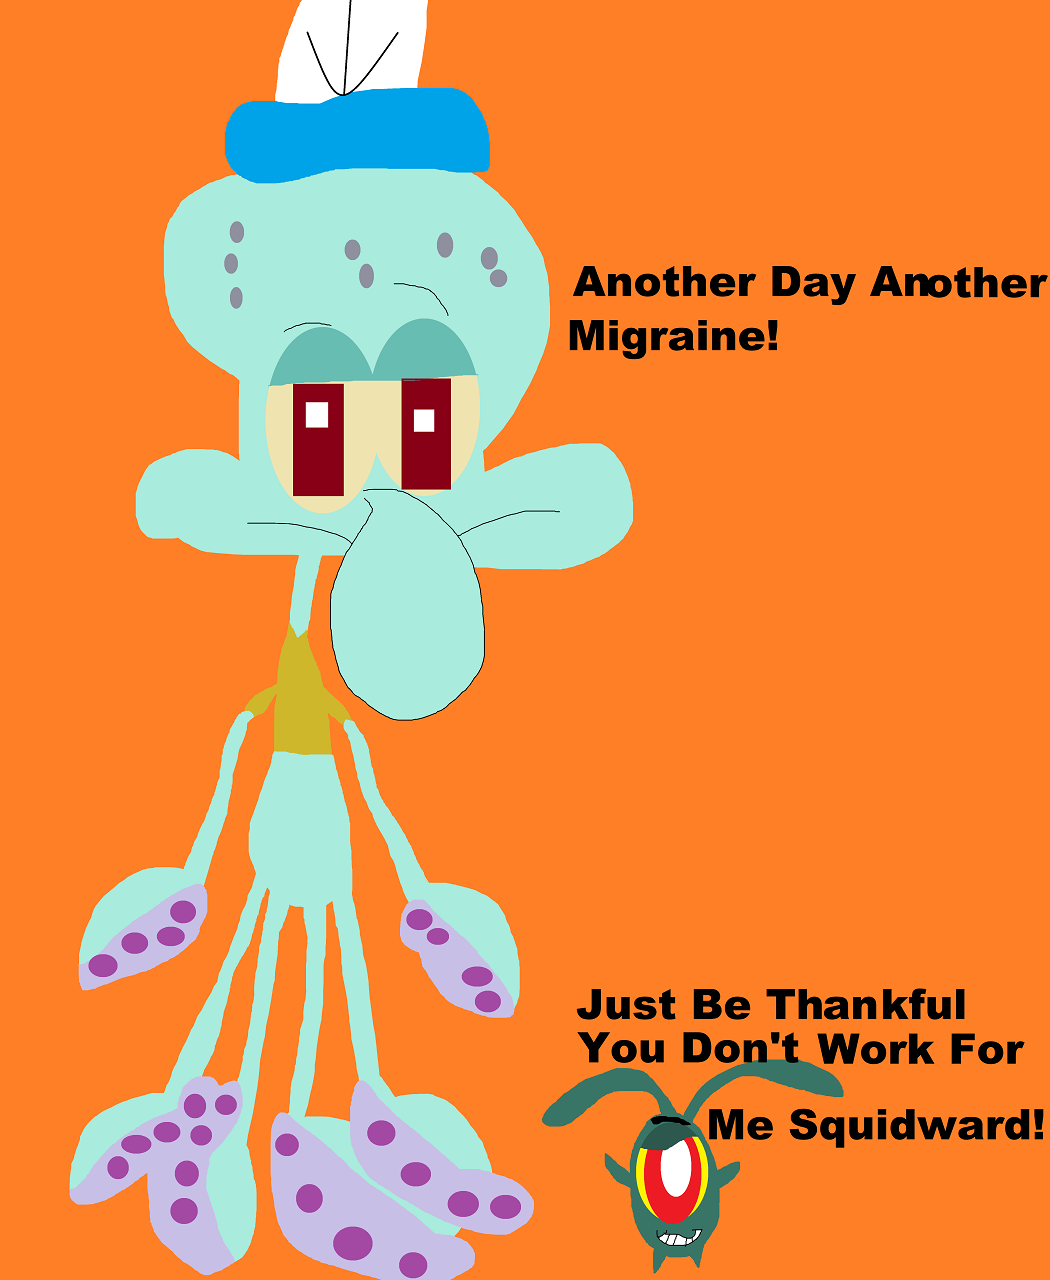 Just Be Thankful You Don't Work For Me Squidward by Falconlobo